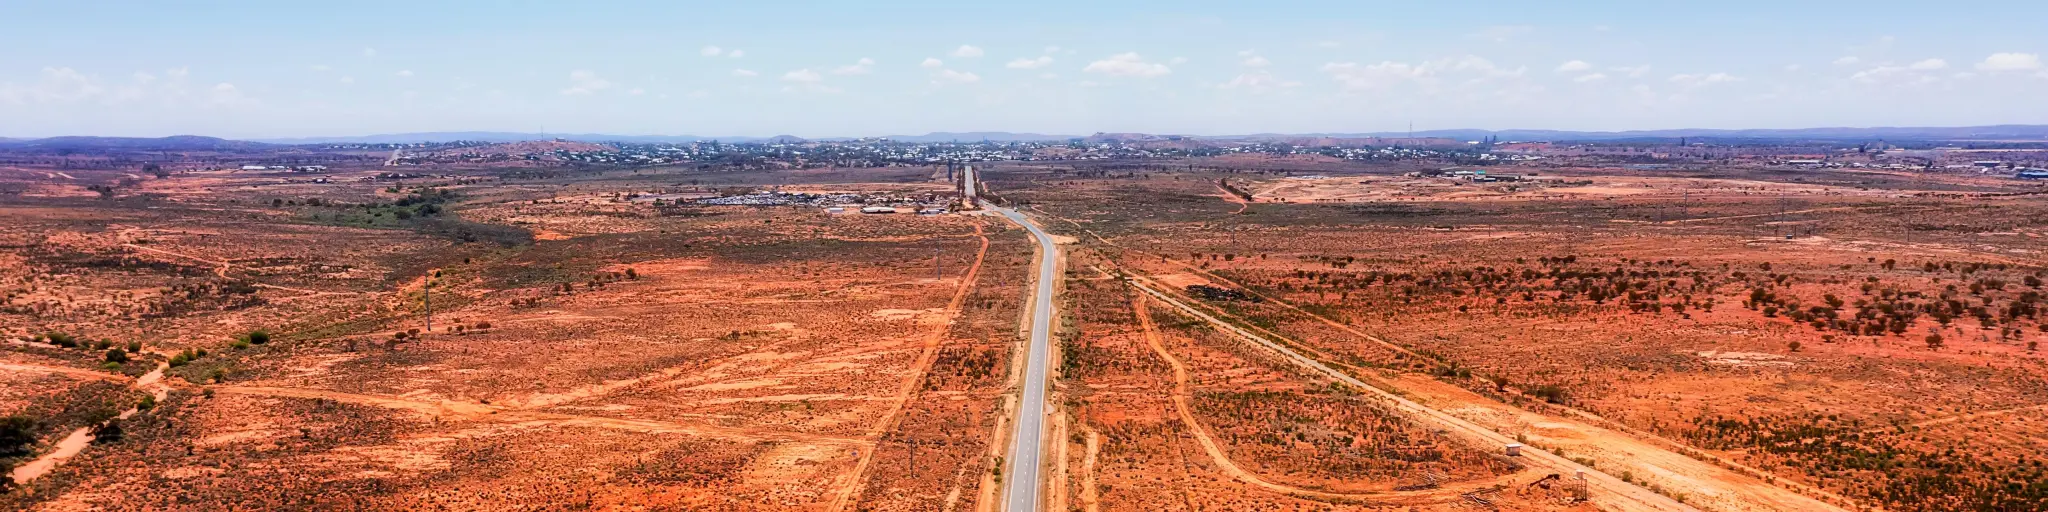 Australian red soil outback at the entrance of Broken Hill, highway running through the image